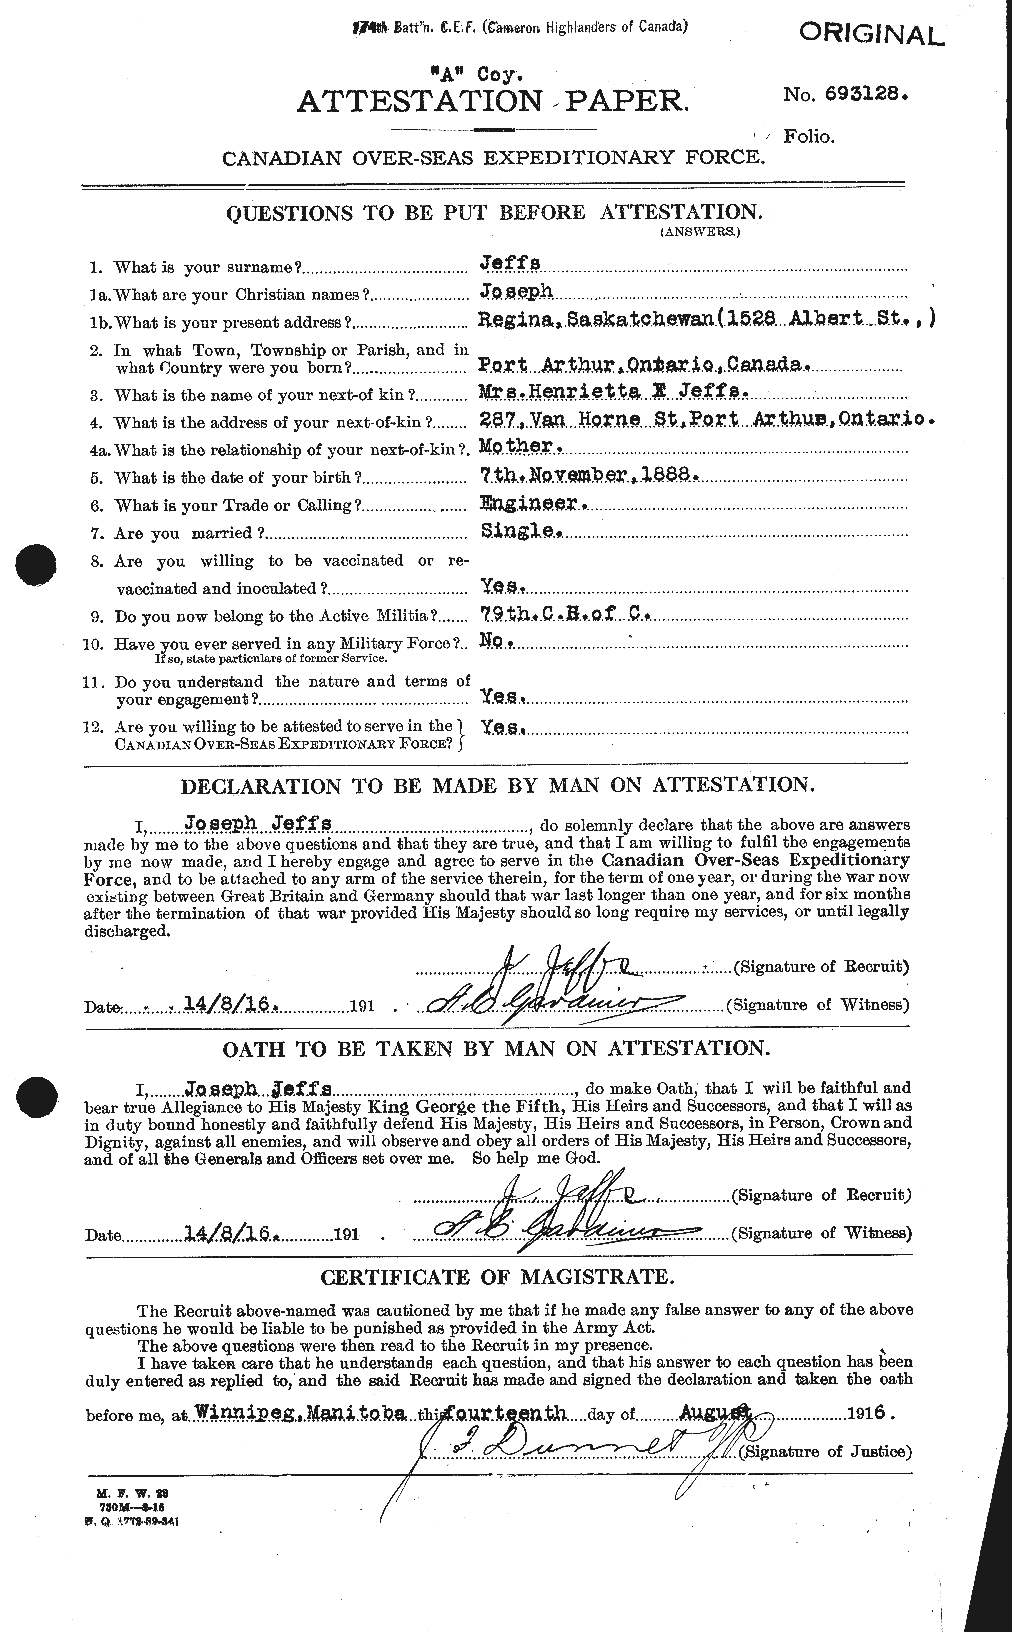 Personnel Records of the First World War - CEF 418003a